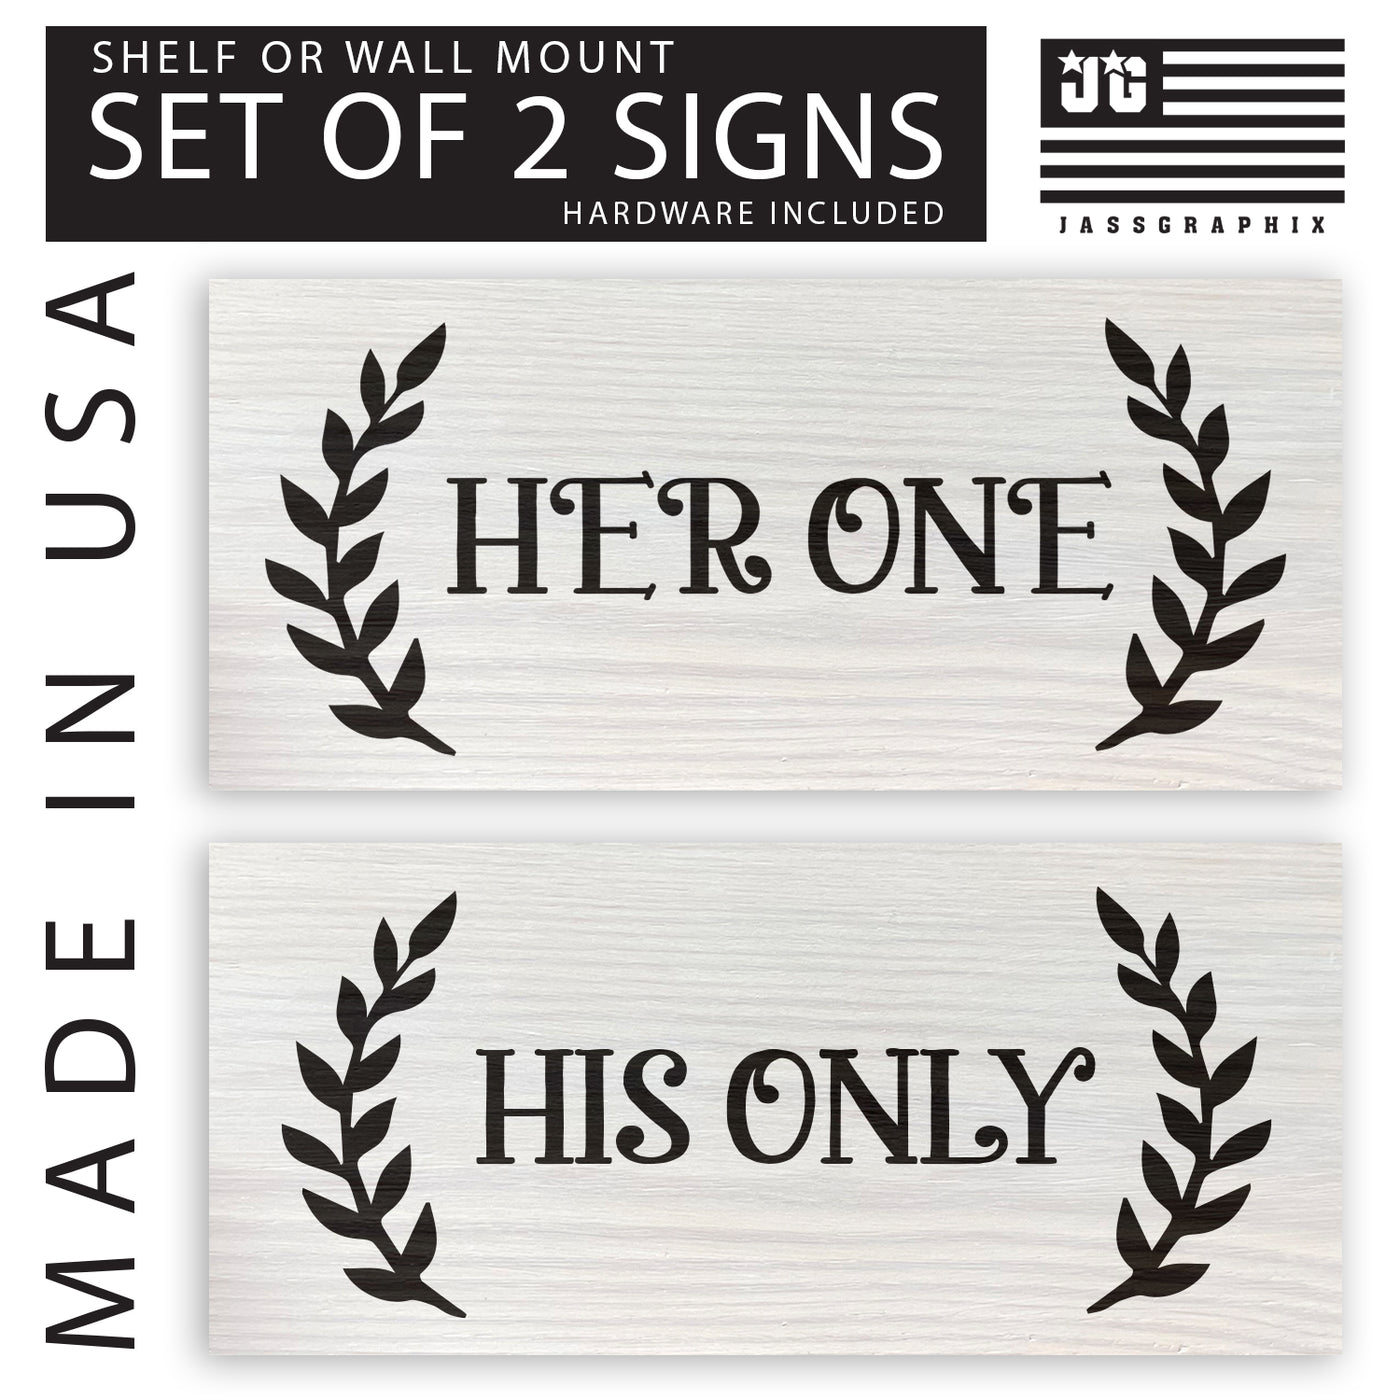 Her One and His Only Made in the USA Graphic